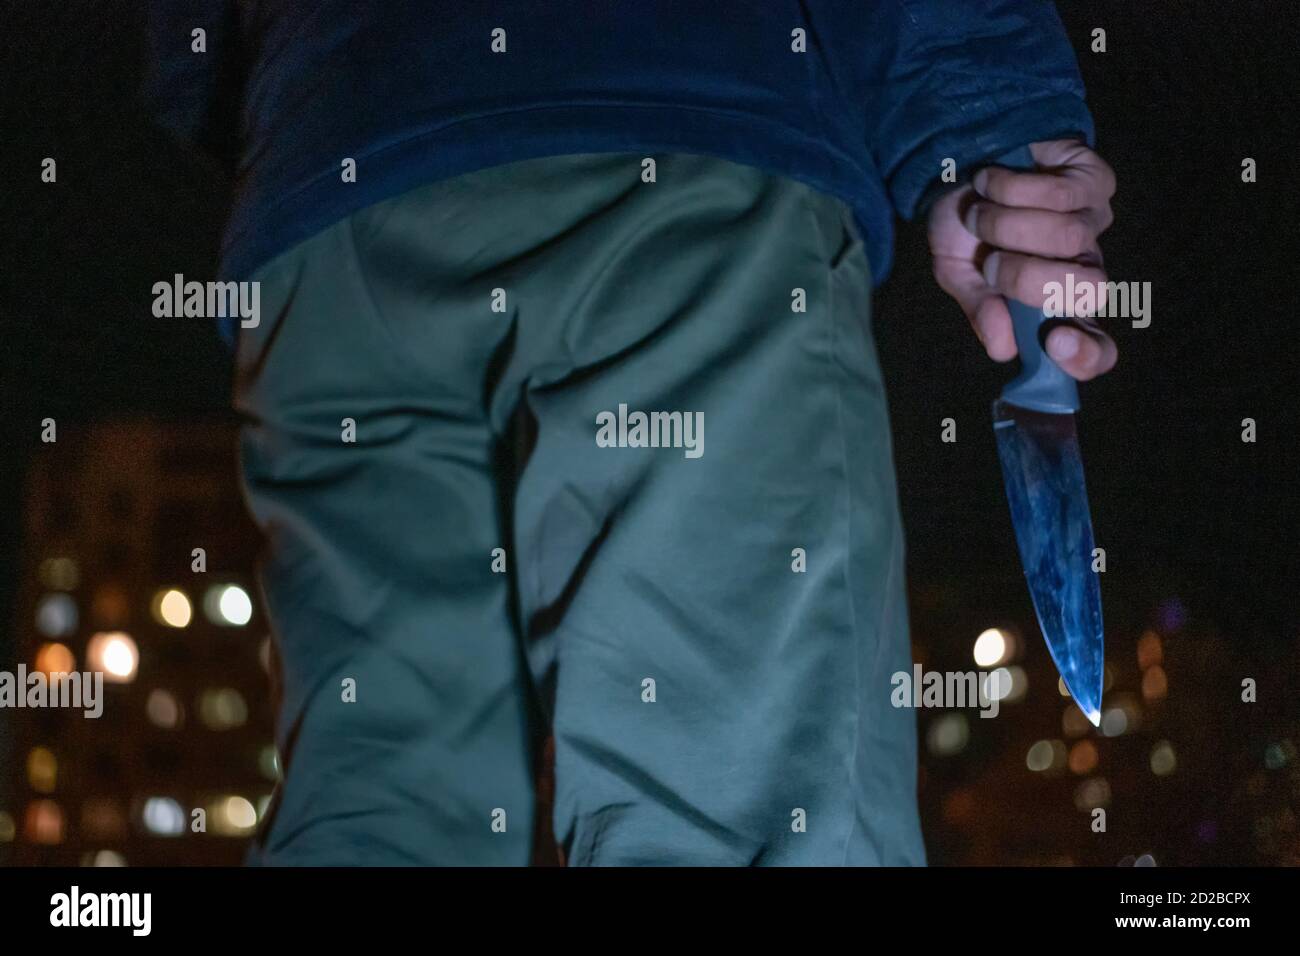 man with a knife in his hands at night on the street close-up. Concept of crimes, robbery Stock Photo